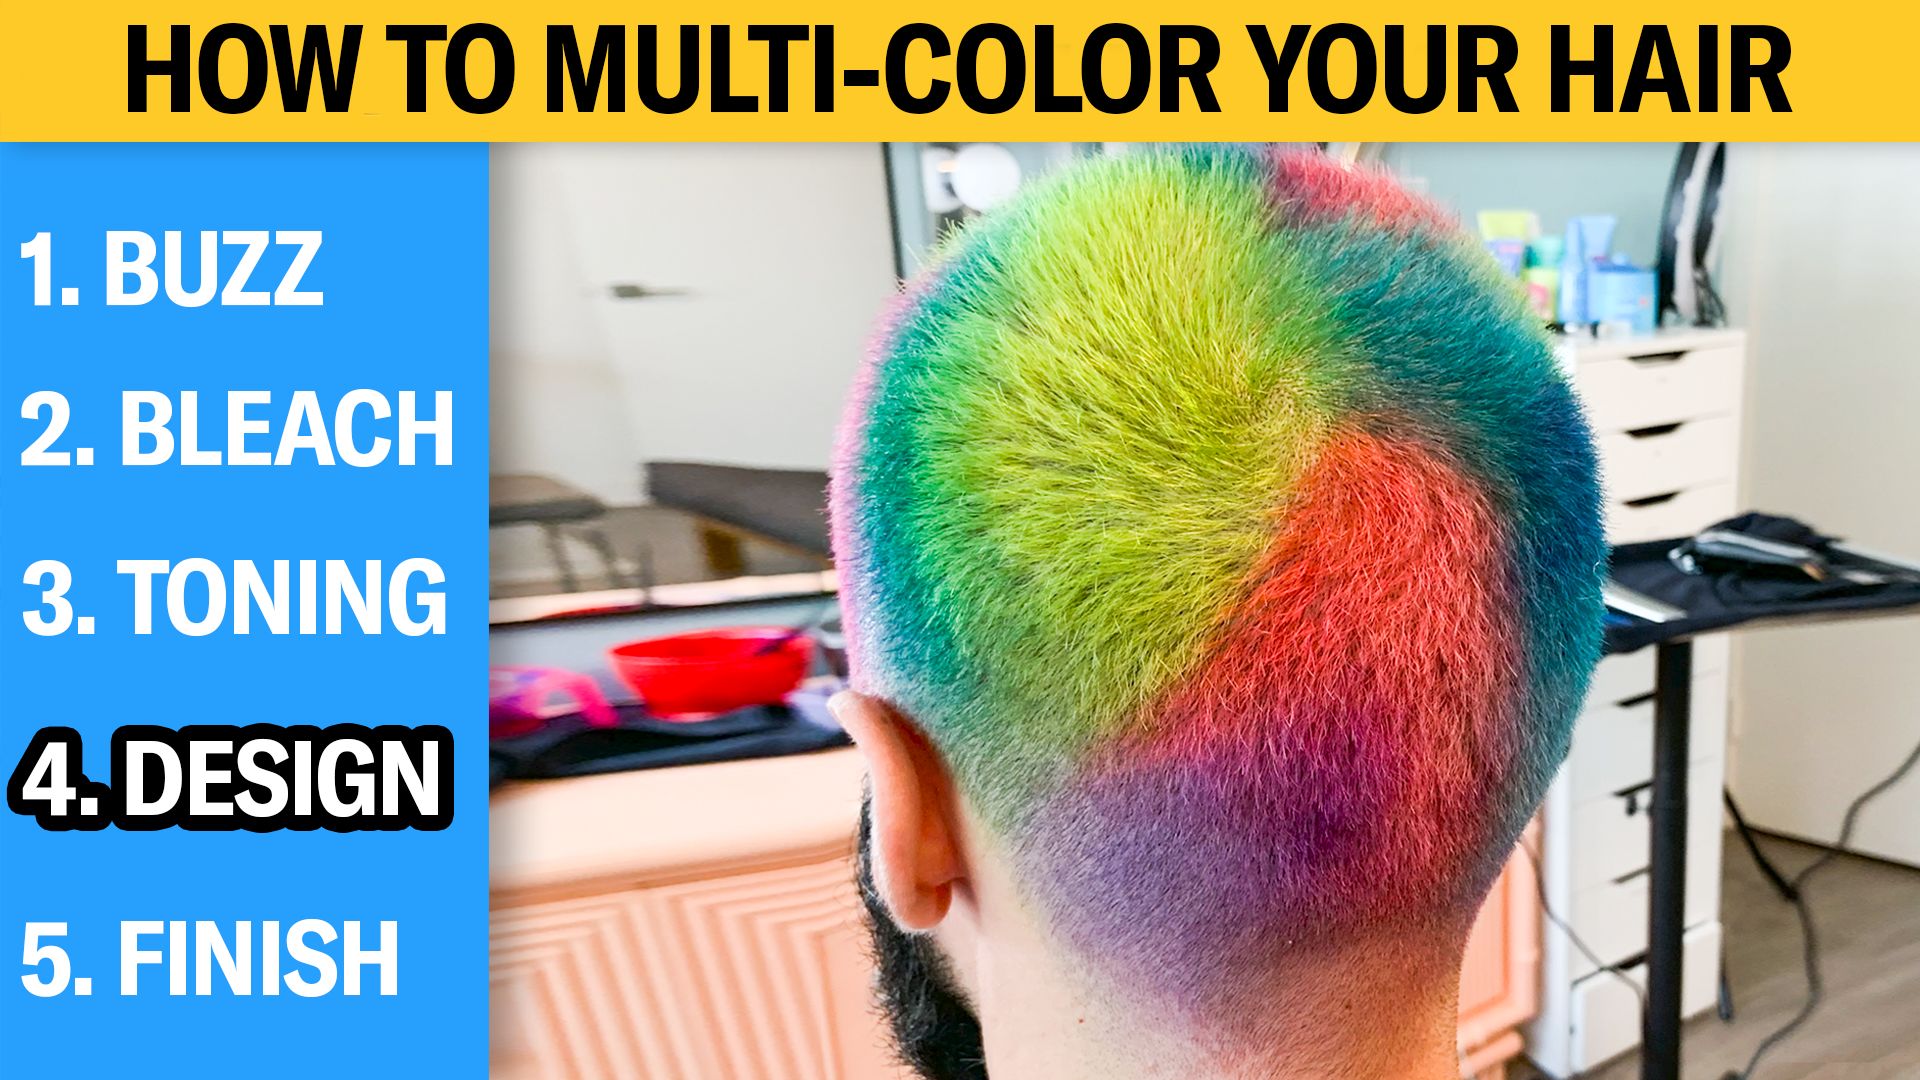 Watch How to Multi-Color Your Hair (5 Step Tutorial) | Grooming | GQ